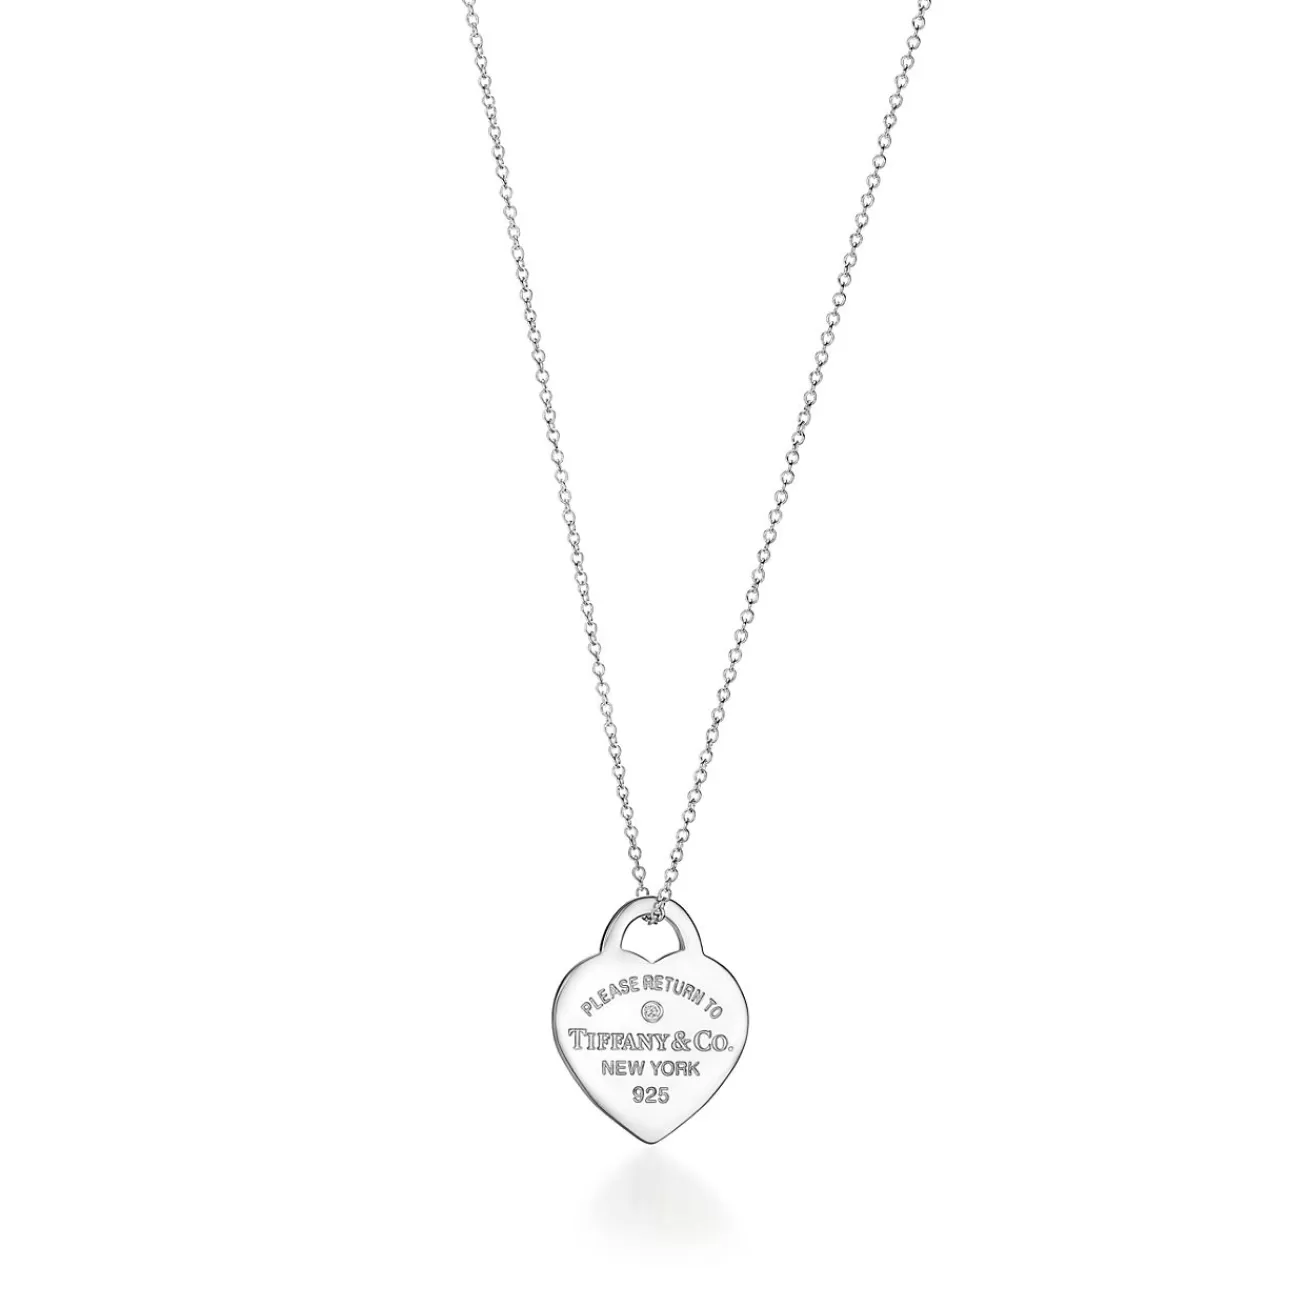 Tiffany & Co. Return to Tiffany® Heart Tag Pendant in Sterling Silver with a Diamond, Small | ^ Necklaces & Pendants | Sterling Silver Jewelry